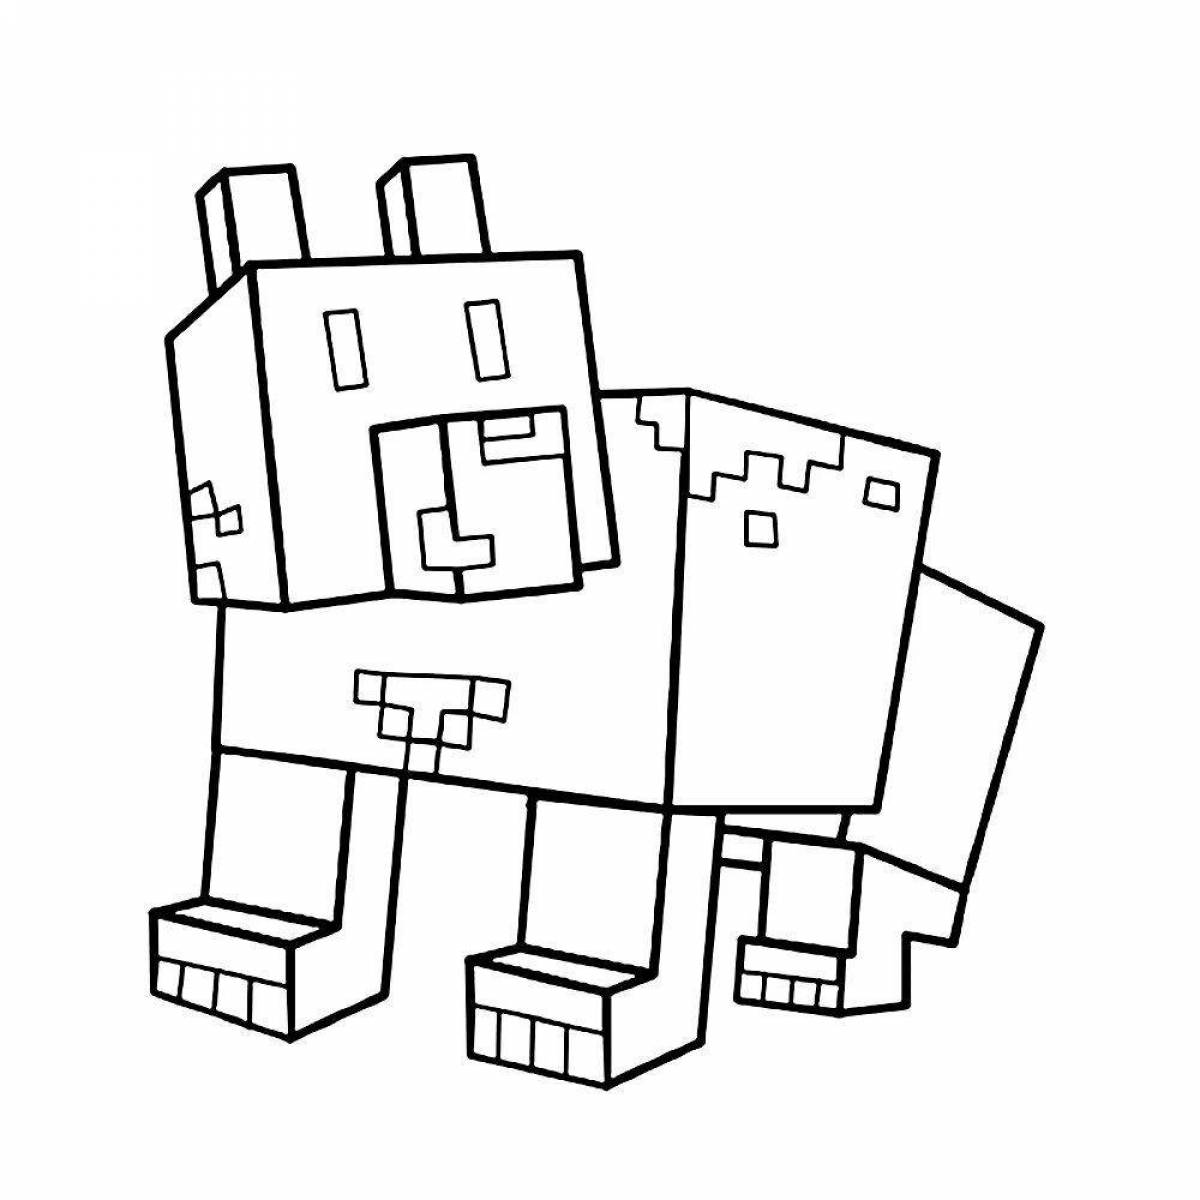 Great minecraft apple coloring page